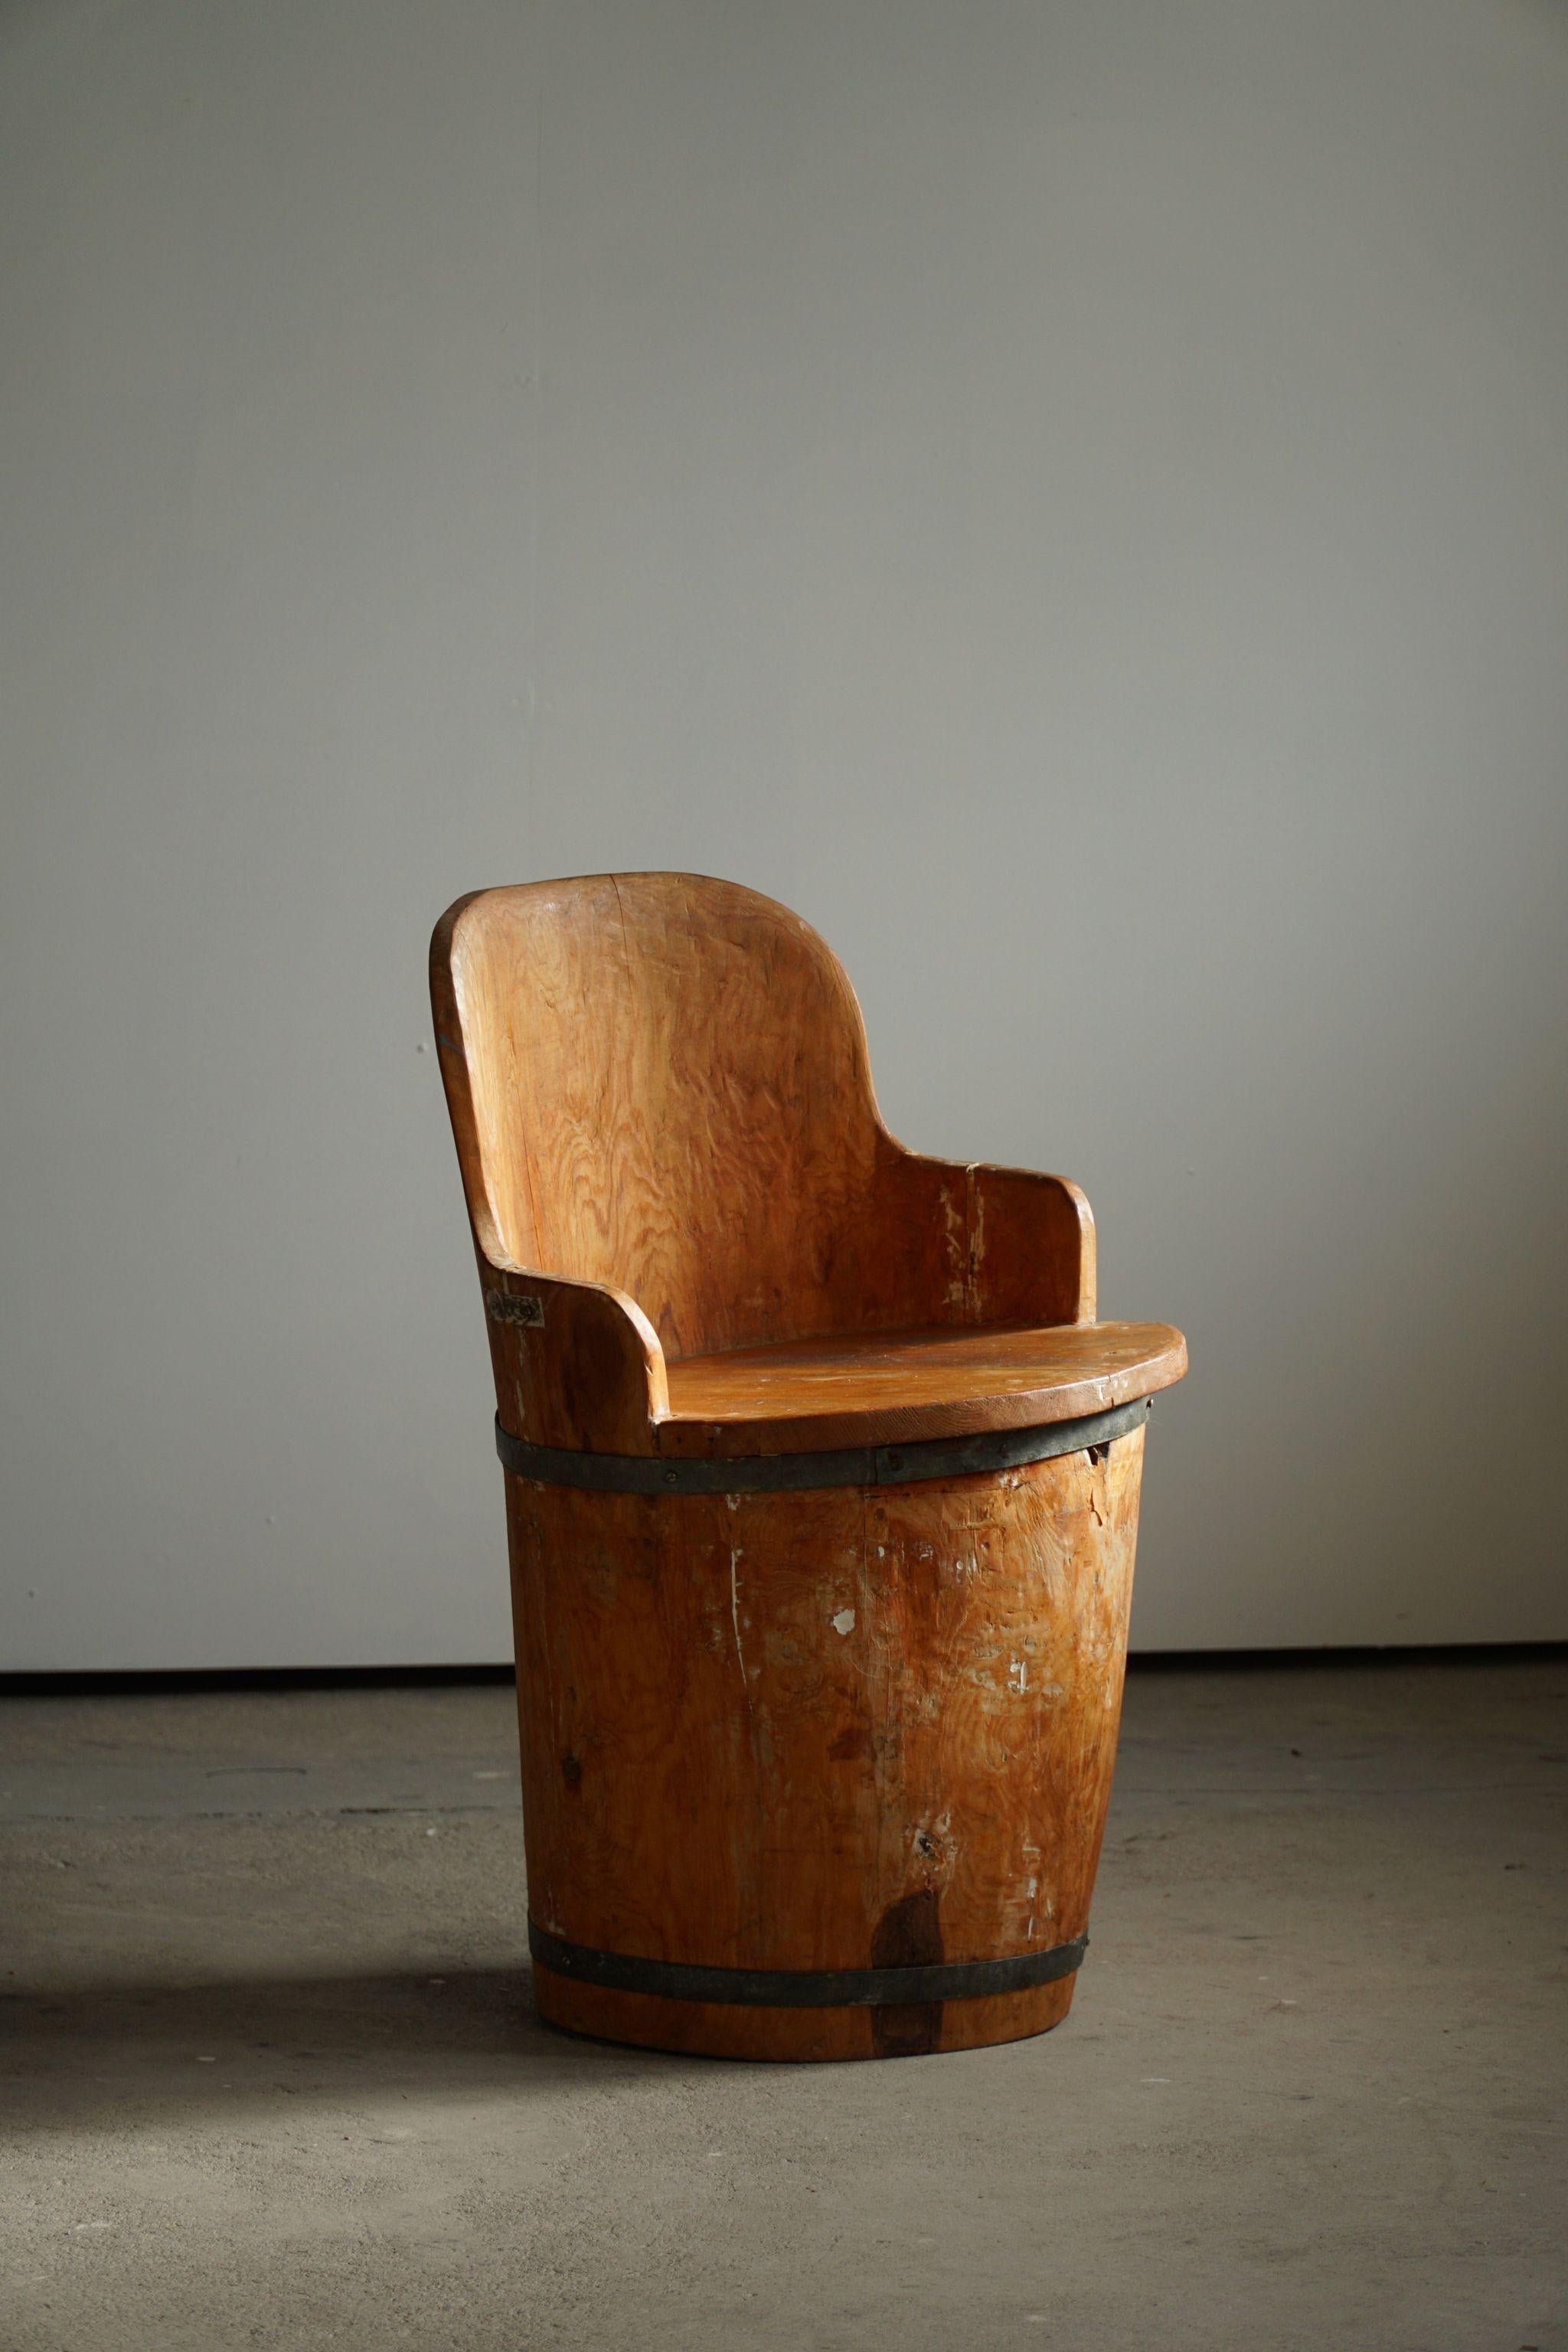 Mid 20th Century Wabi Sabi Stump Chair in Pine, by a Swedish Cabinetmaker, 1950s For Sale 3